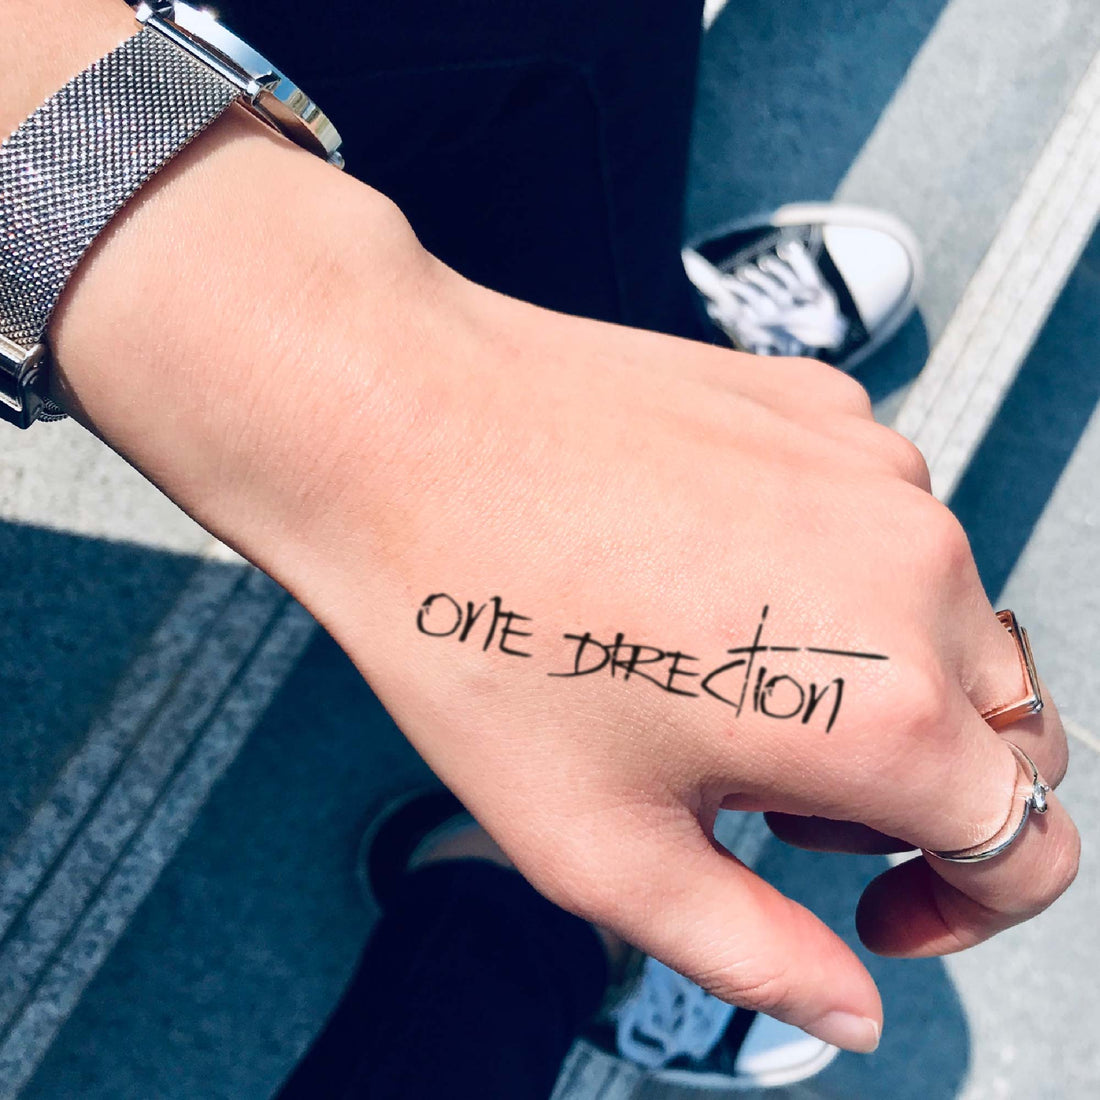 One Direction custom temporary tattoo sticker design idea inspiration meanings removal arm wrist hand words font name signature calligraphy lyrics tour concert outfits merch accessory gift souvenir costumes wear dress up code